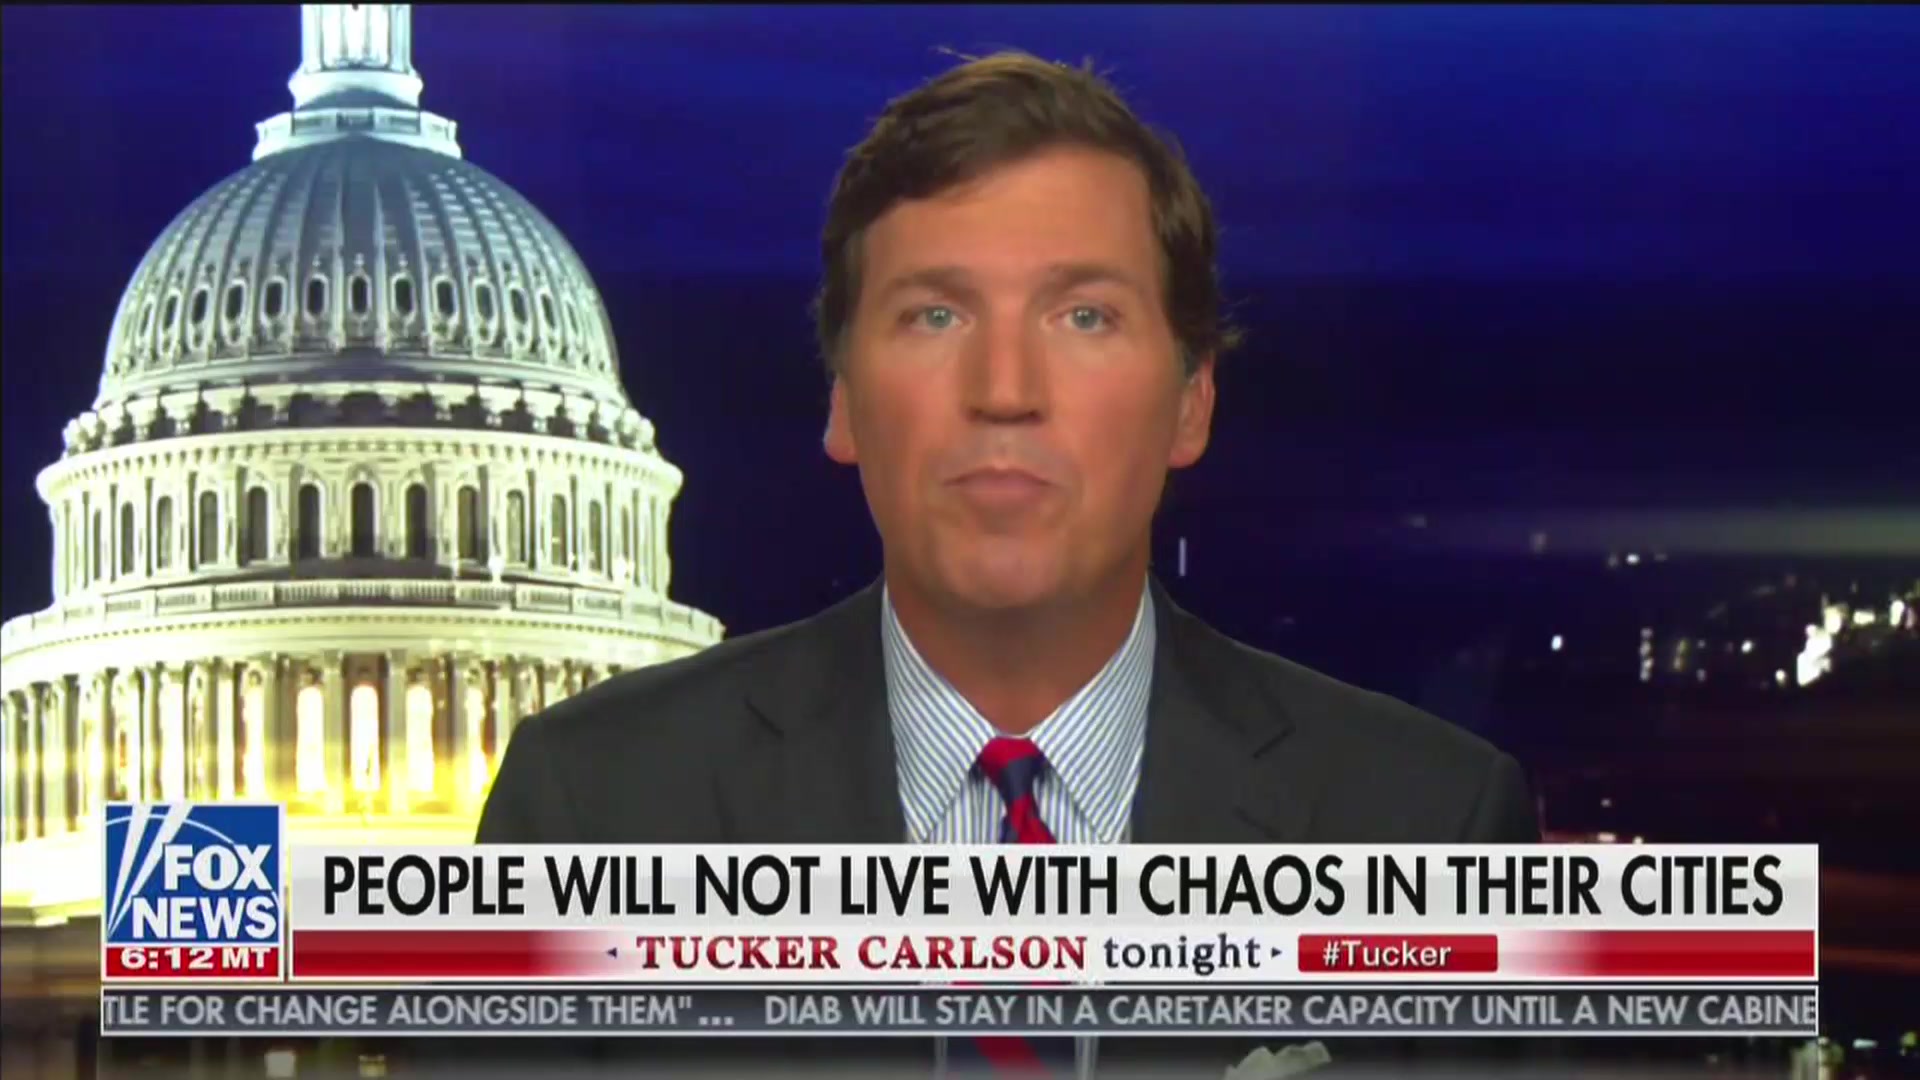 Tucker Carlson: ‘Demographic Shifts’ Will Causes Cities to Be ‘Broke, Dirty, and Dangerous’